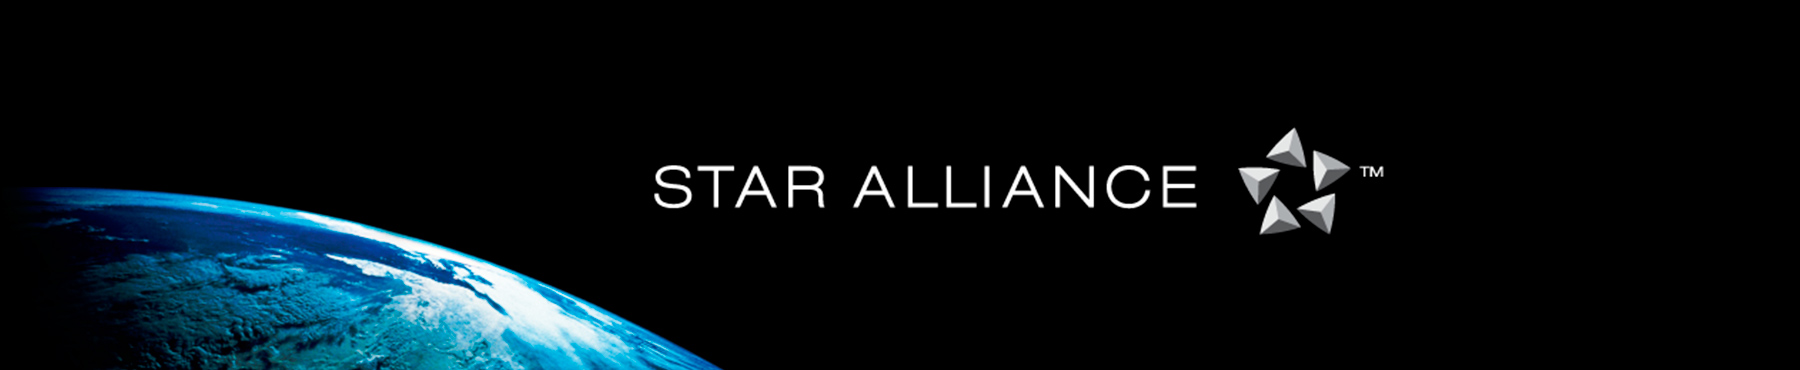 Round the World con Star Alliance Book and Fly